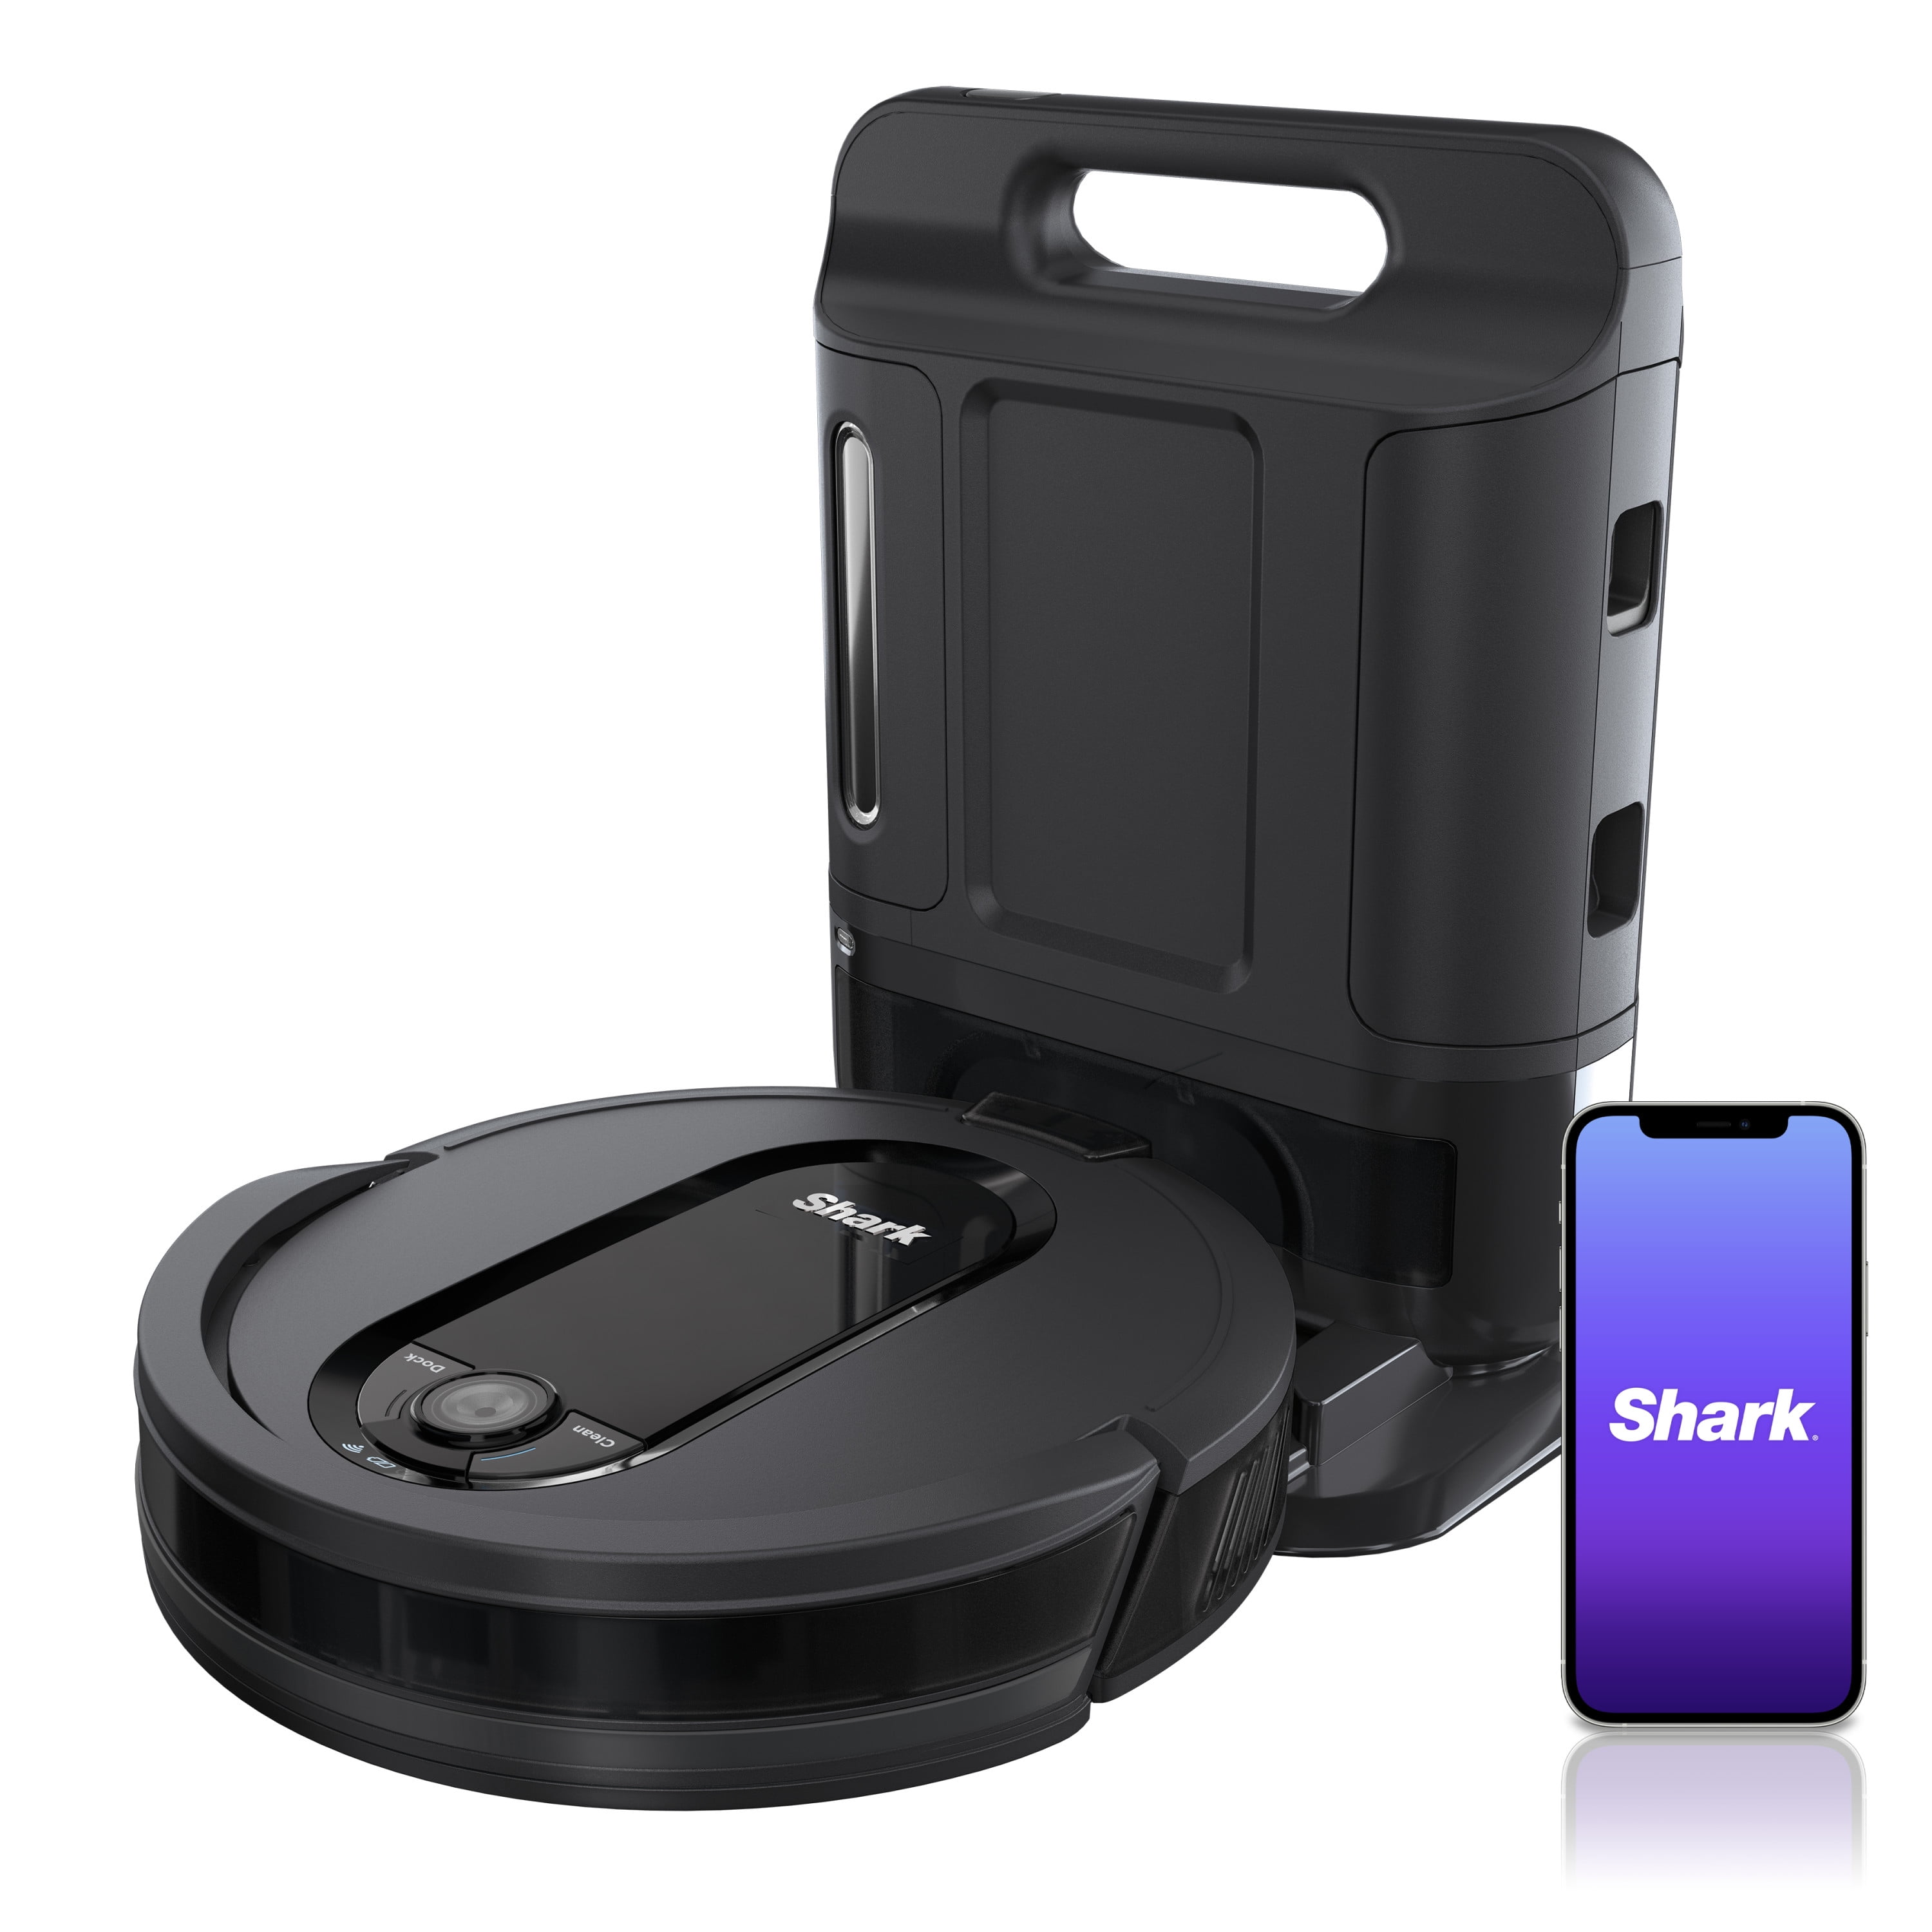 Details about   ionVac Robot Vacuum Powerful Suction Self Charging Wi-fi Connected Auto cleaning 